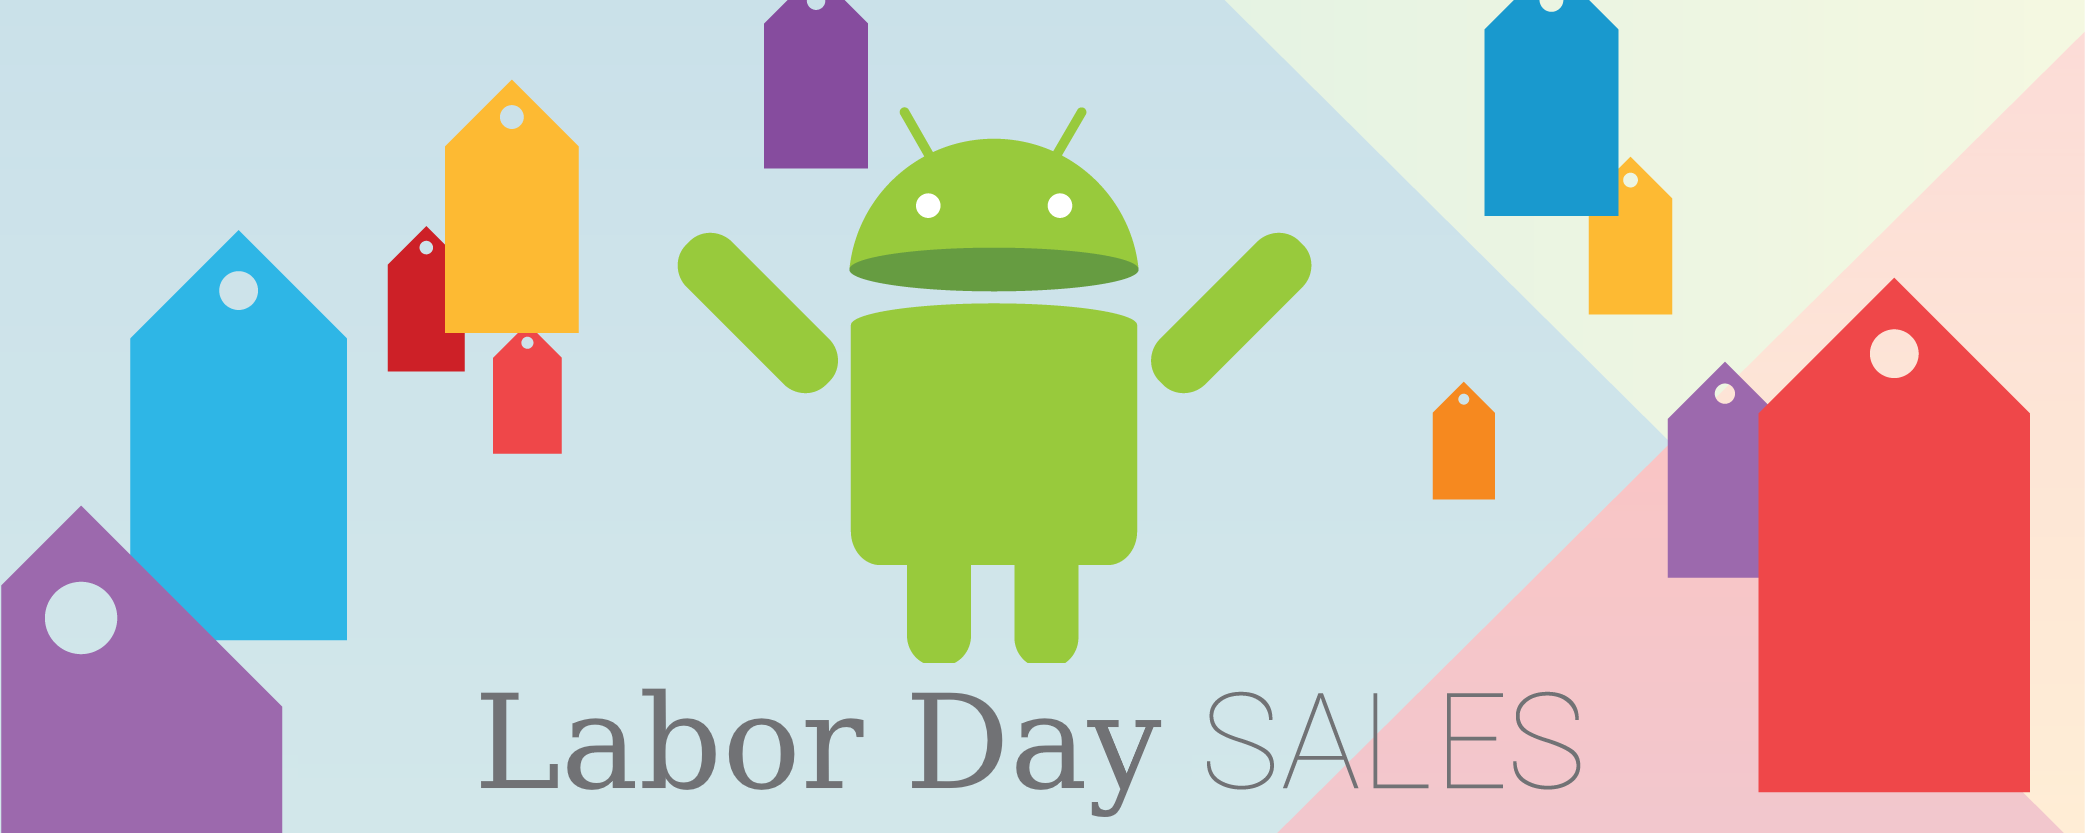 44 temporarily free and 53 on-sale apps and games for Labor Day